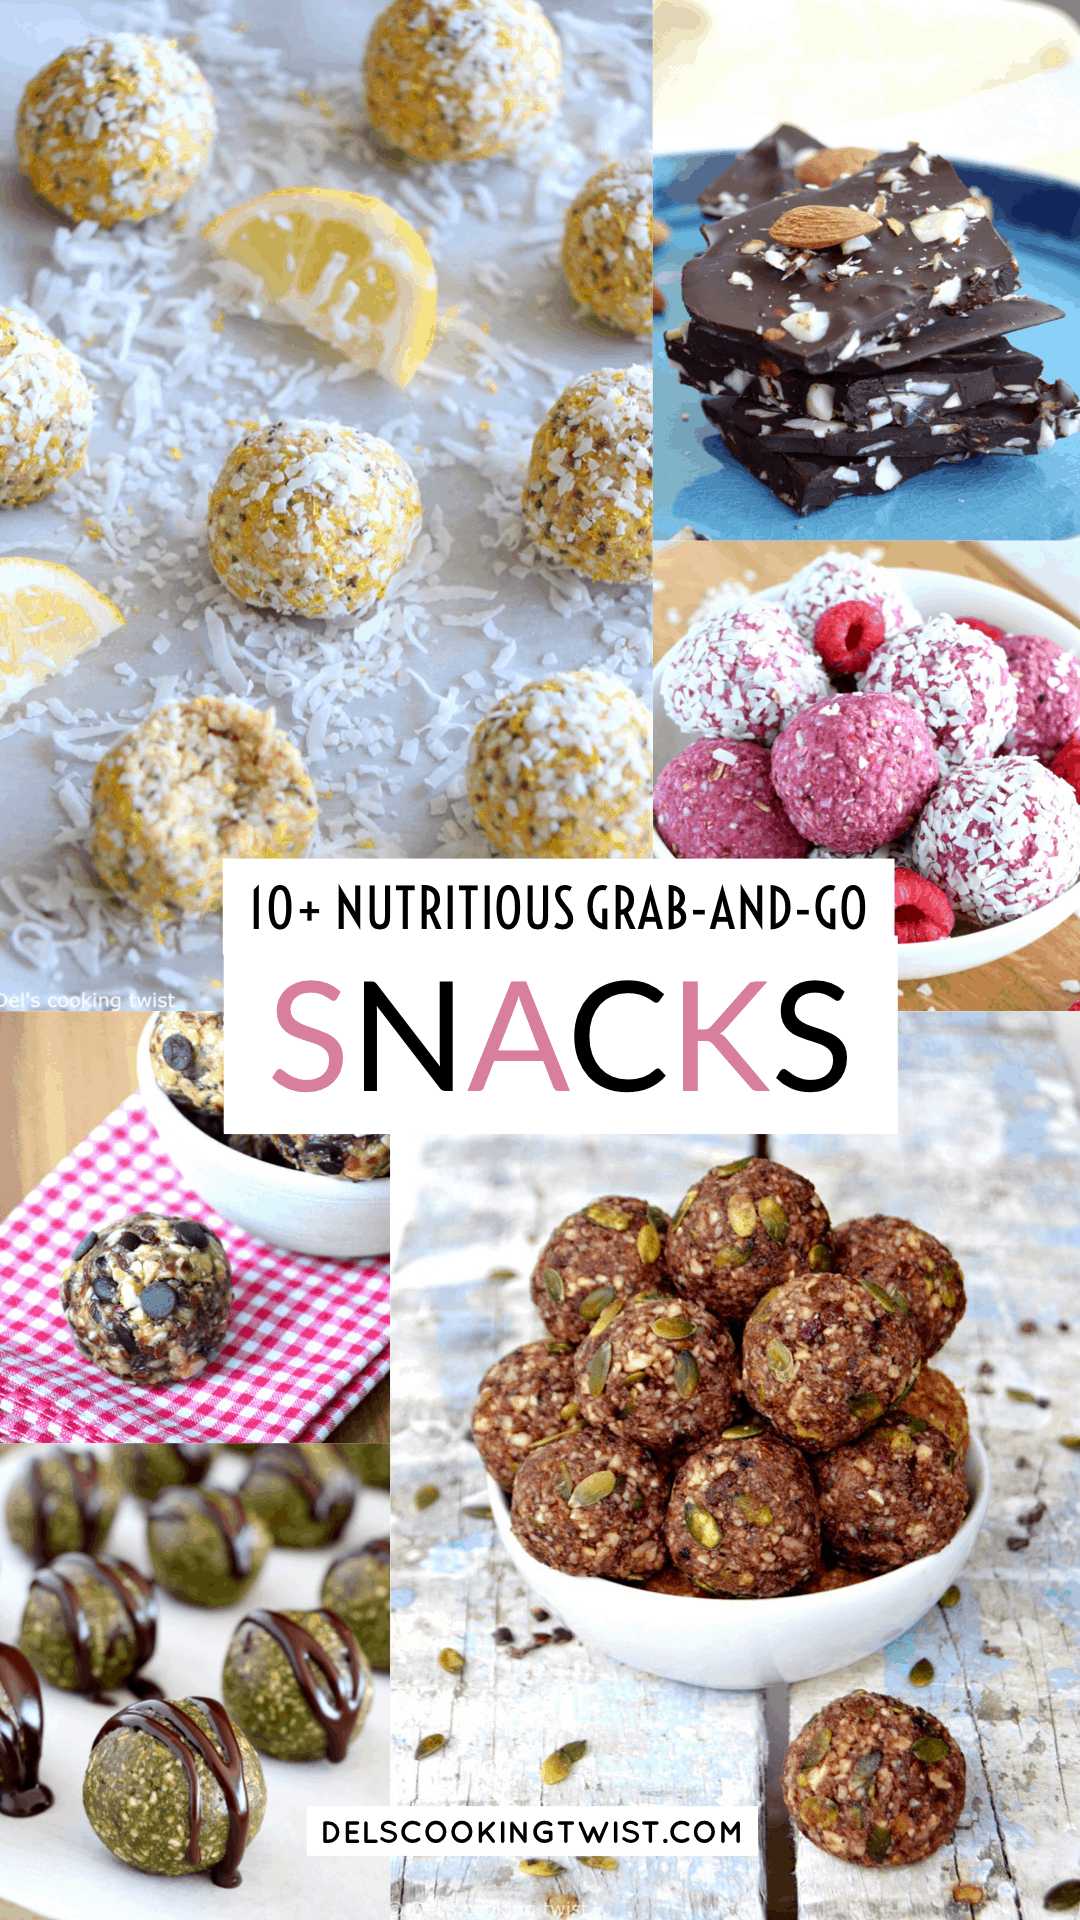 10+ Nutritious Grab-and-Go Snacks